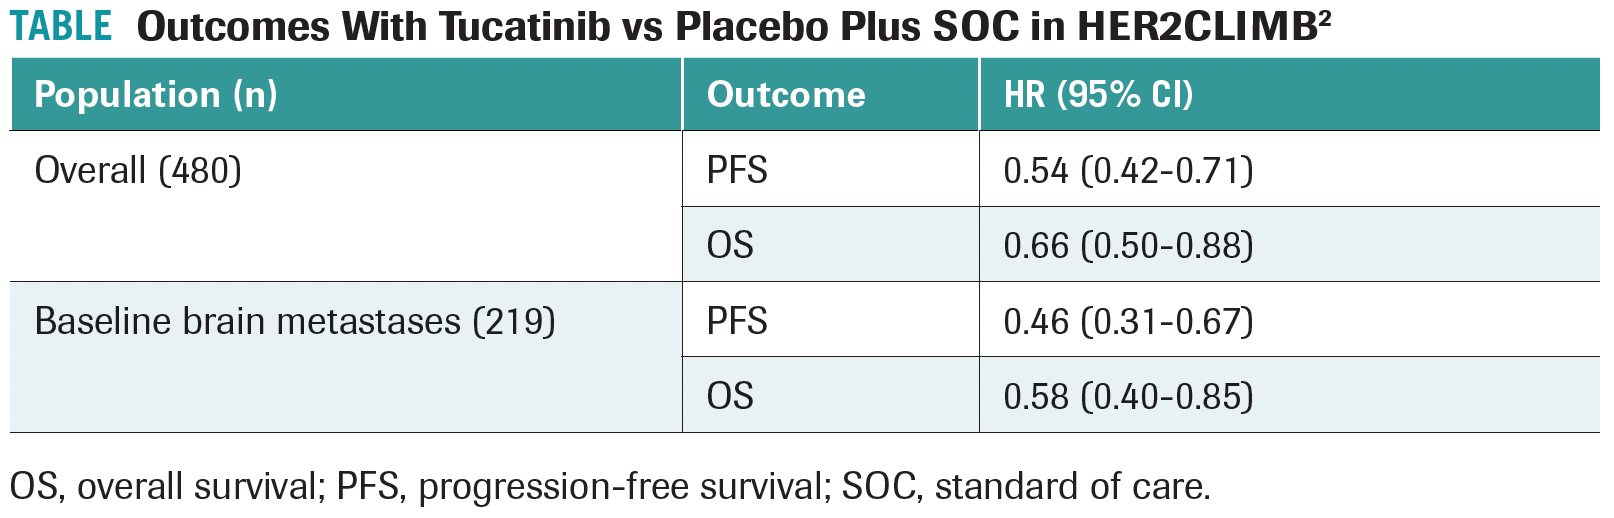 TABLE. Outcomes With Tucatinib vs Placebo Plus SOC in HER2CLIMB